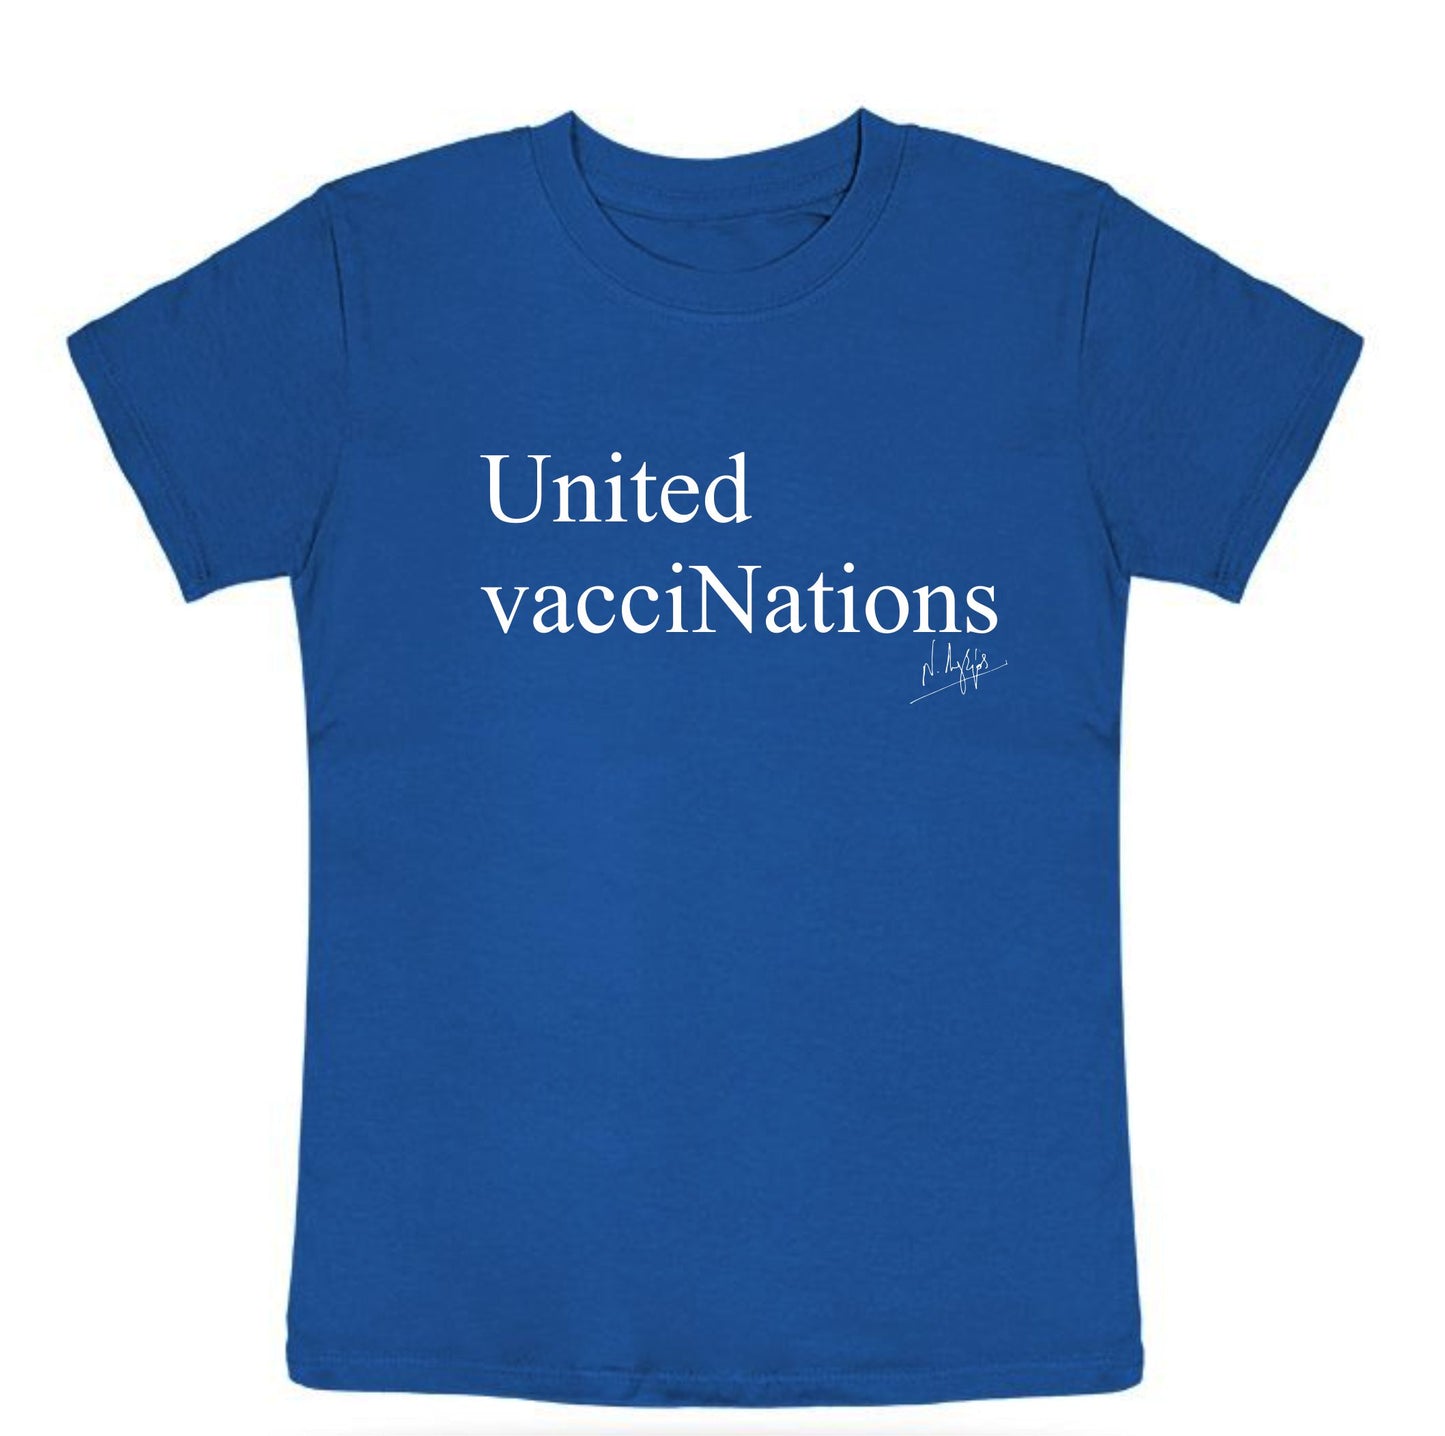 United vacciNations